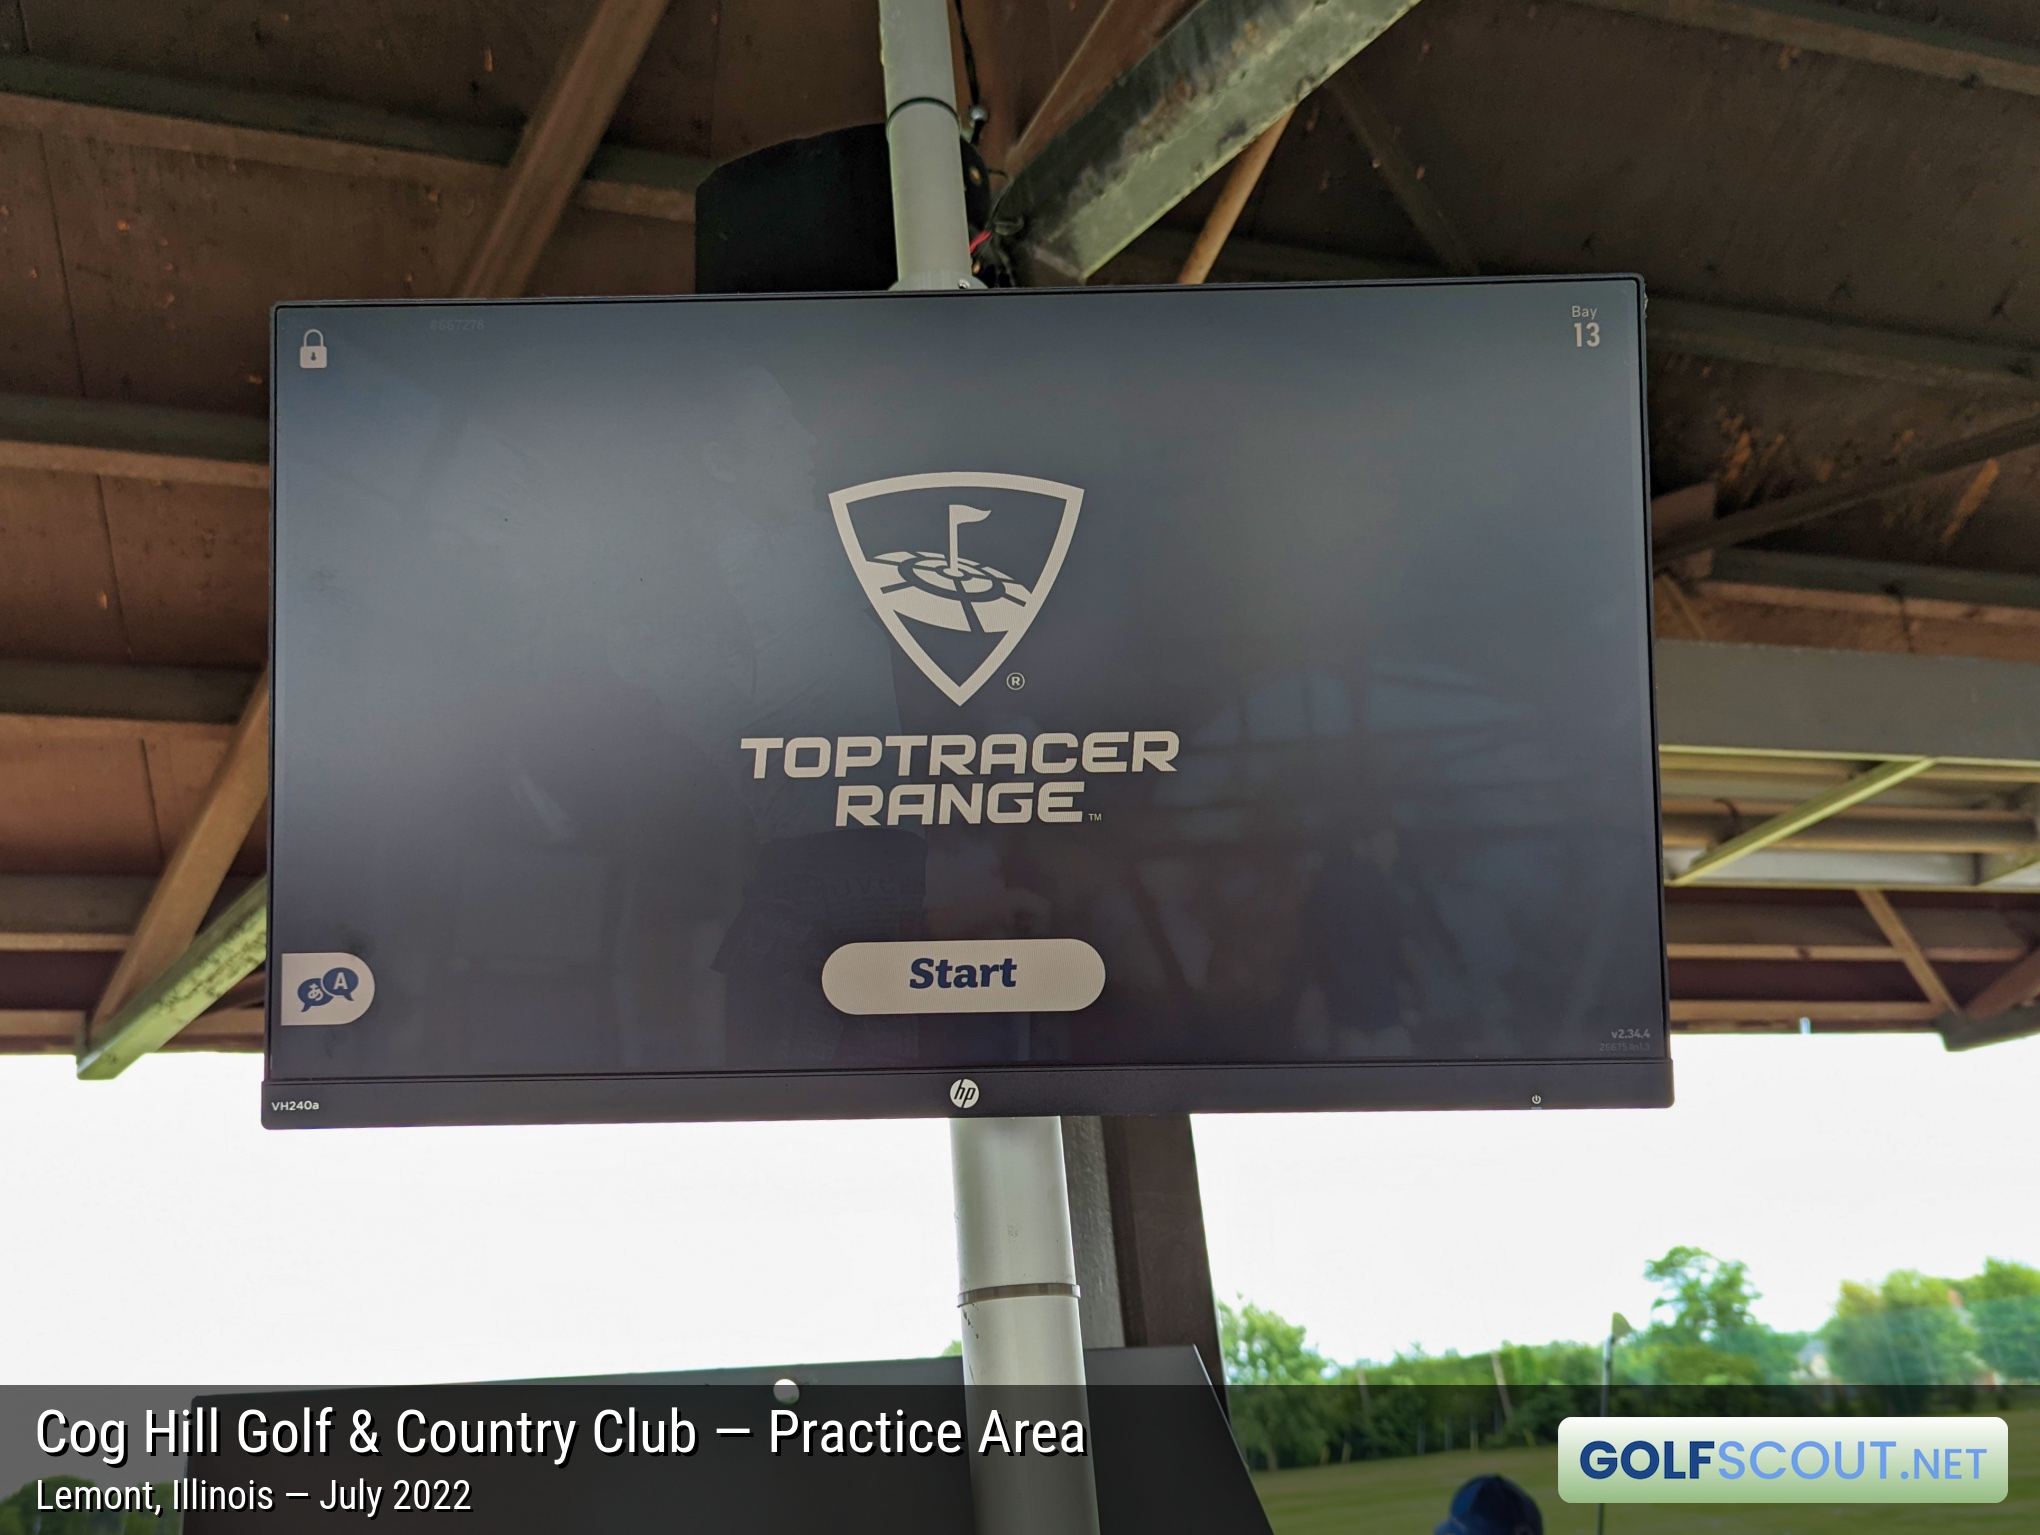 Photo of the practice area at Cog Hill Course #2 - Ravines in Lemont, Illinois. The driving range has a tracking system called TopTracer, which analyzes your ball flight, just like the pros.